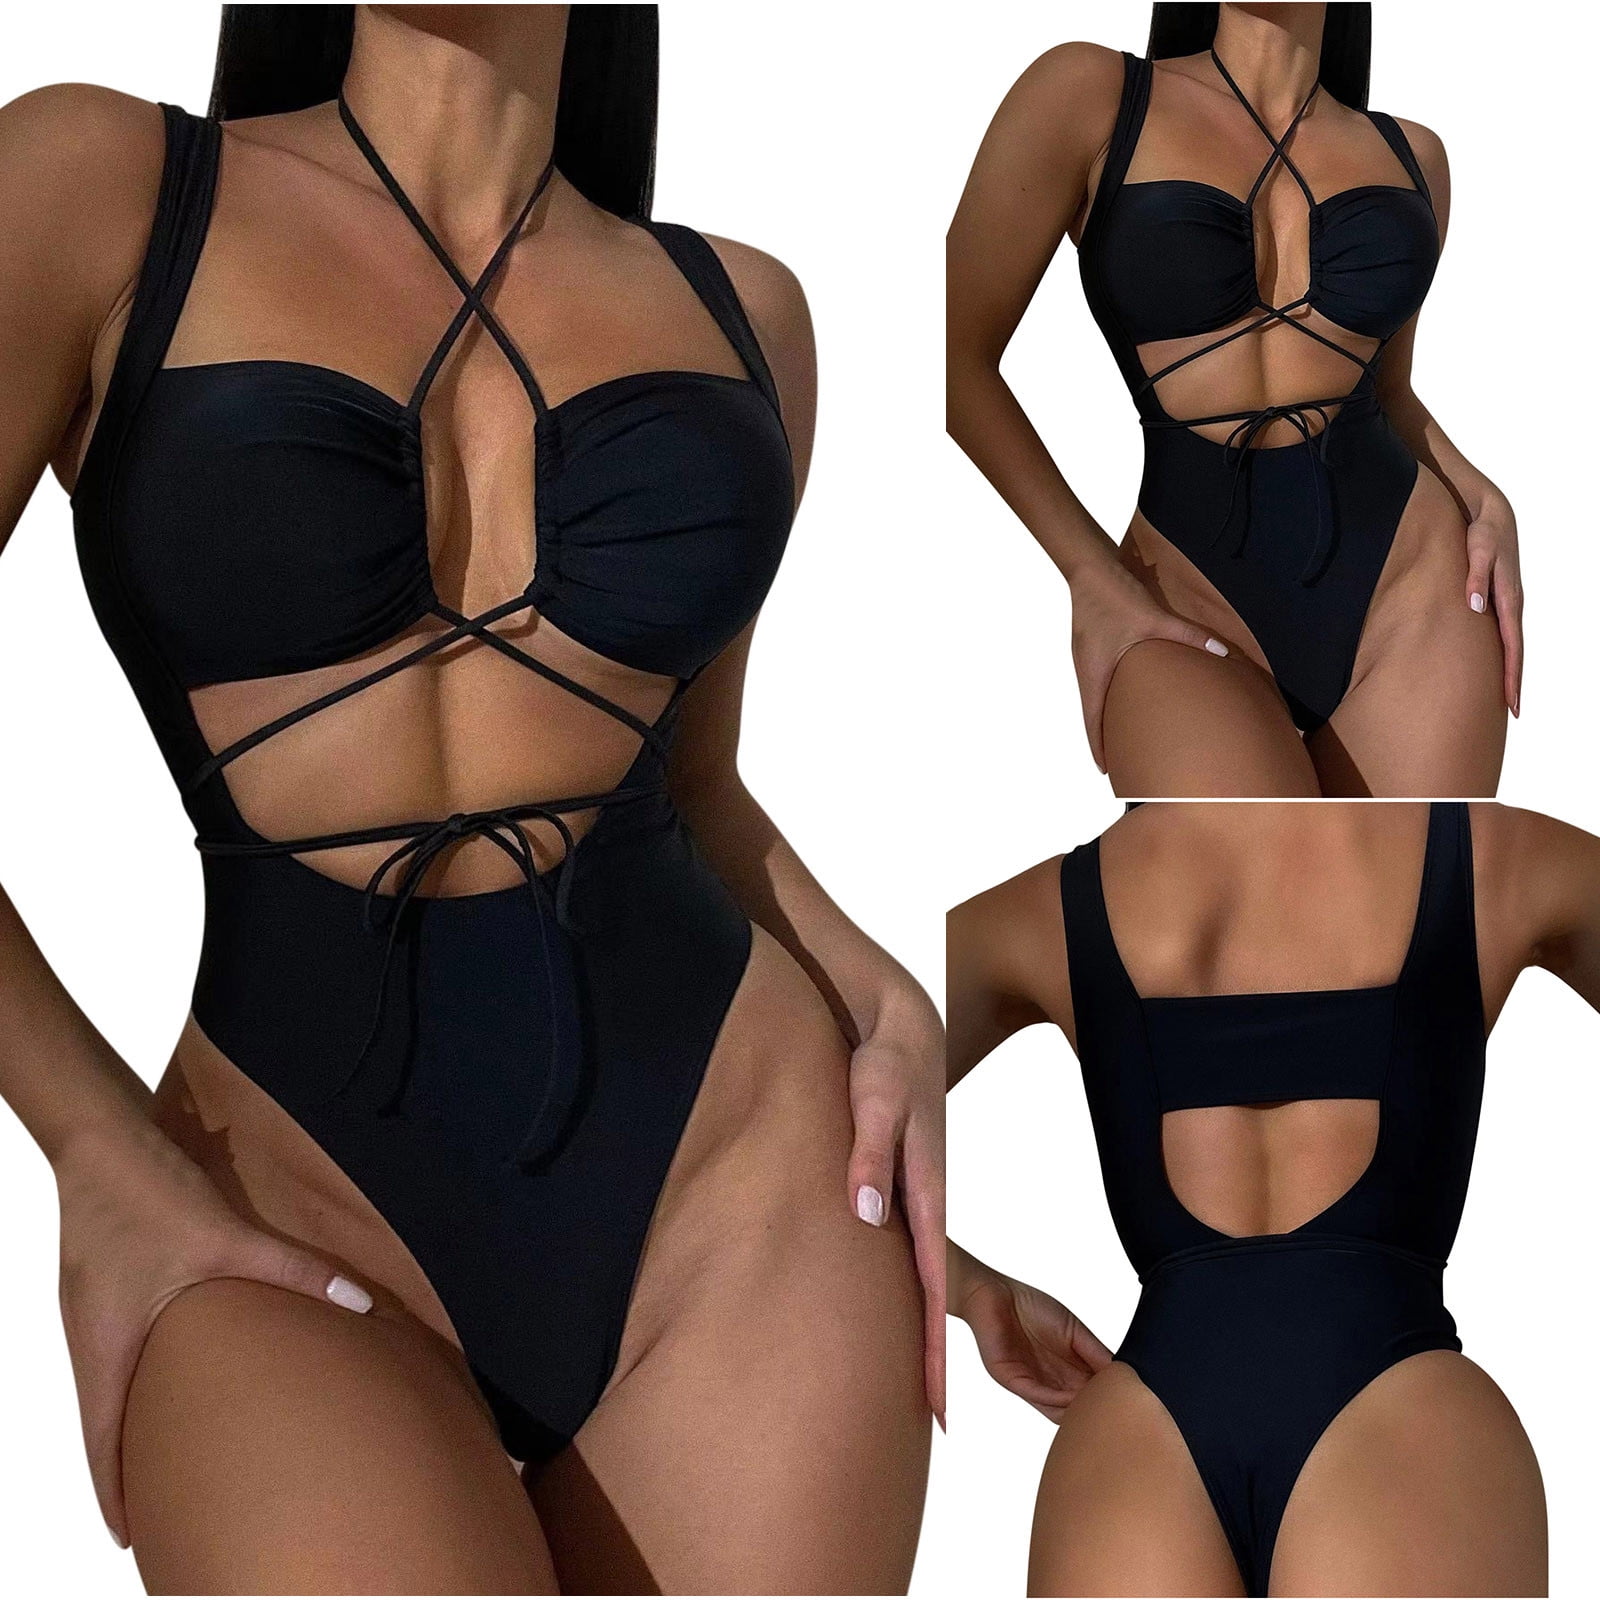 Herrnalise Women's Attractive One-piece Swimsuit Female Lace-up Hollowed  Out Backless Lace-up Bikini Bikinis for Women